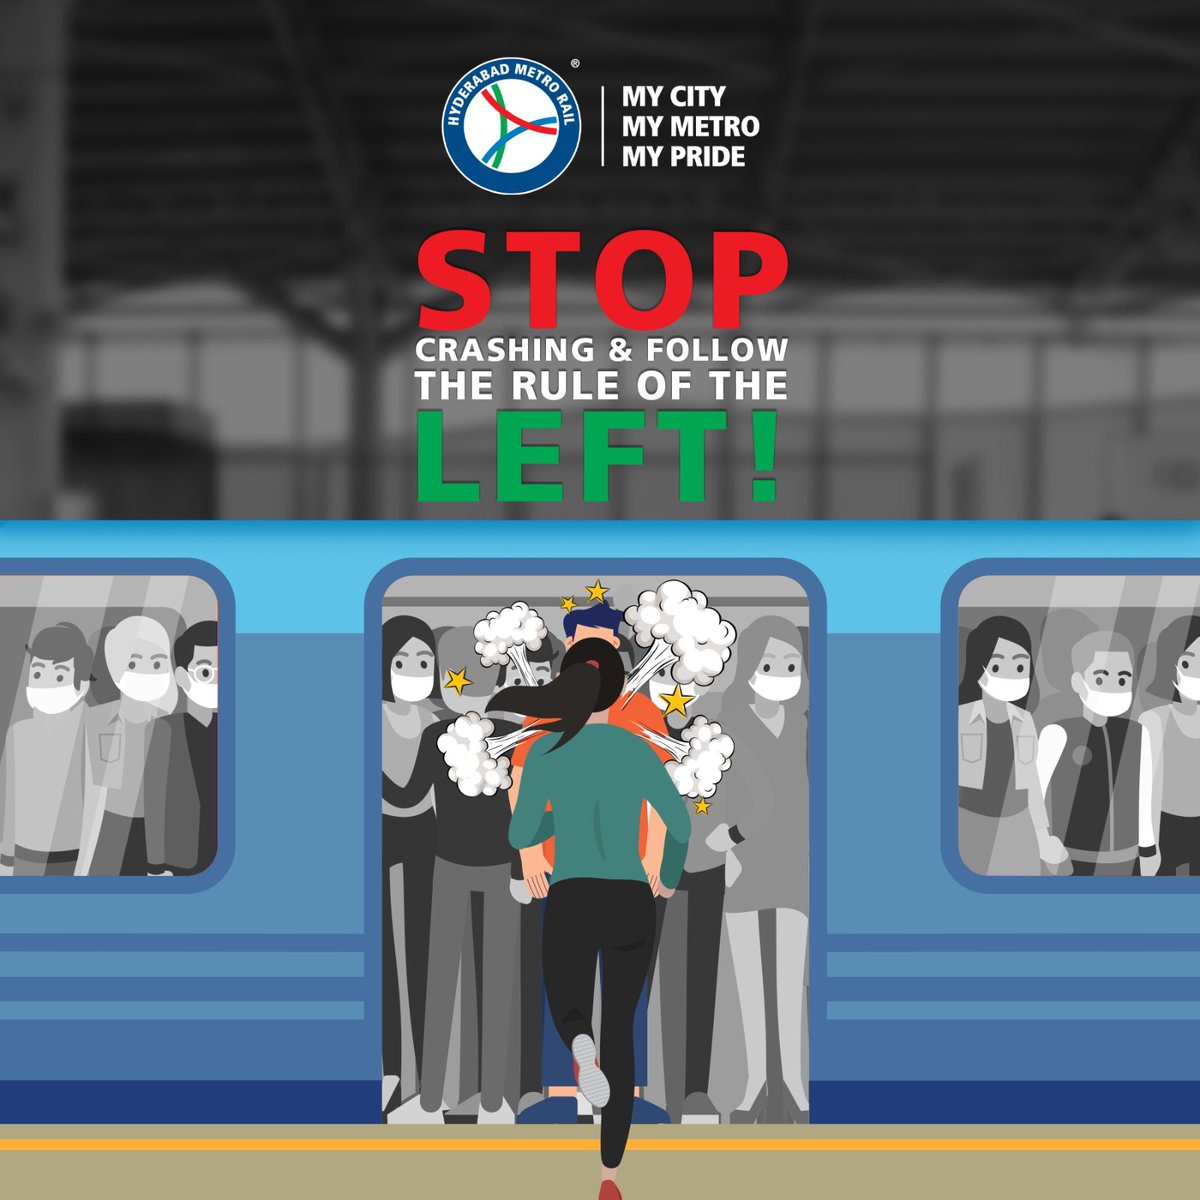 Remember, be it stepping in or stepping out, always follow the rule of the left to avoid crashing into your fellow passengers, be it while entering or exiting. #landtmetro #mycitymymetromypride #metroride #HyderabadMetro #MetroRail #metrostation #publictransport #SafeRahoYaaron…